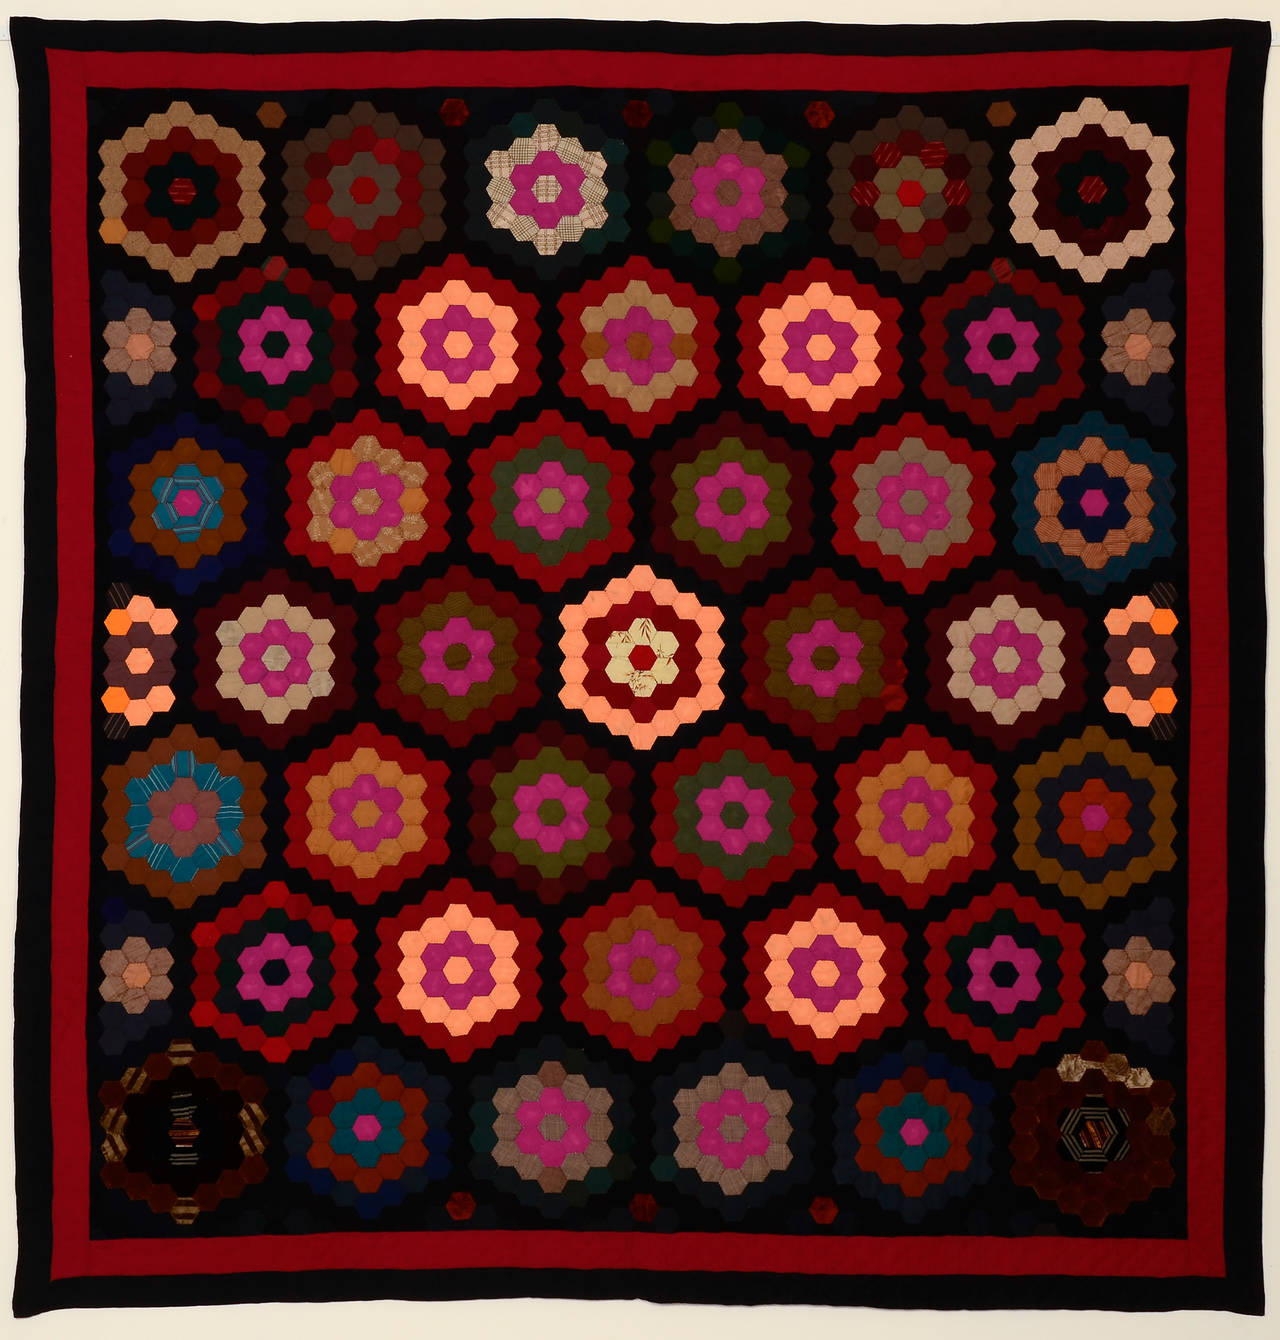 This Mennonite hexagons quilt makes a stunning composition. The colors are beautifully arranged with the peach color blocks in all the right places. The red and black borders repeat the same fabrics within the quilt. The quilt is almost entirely